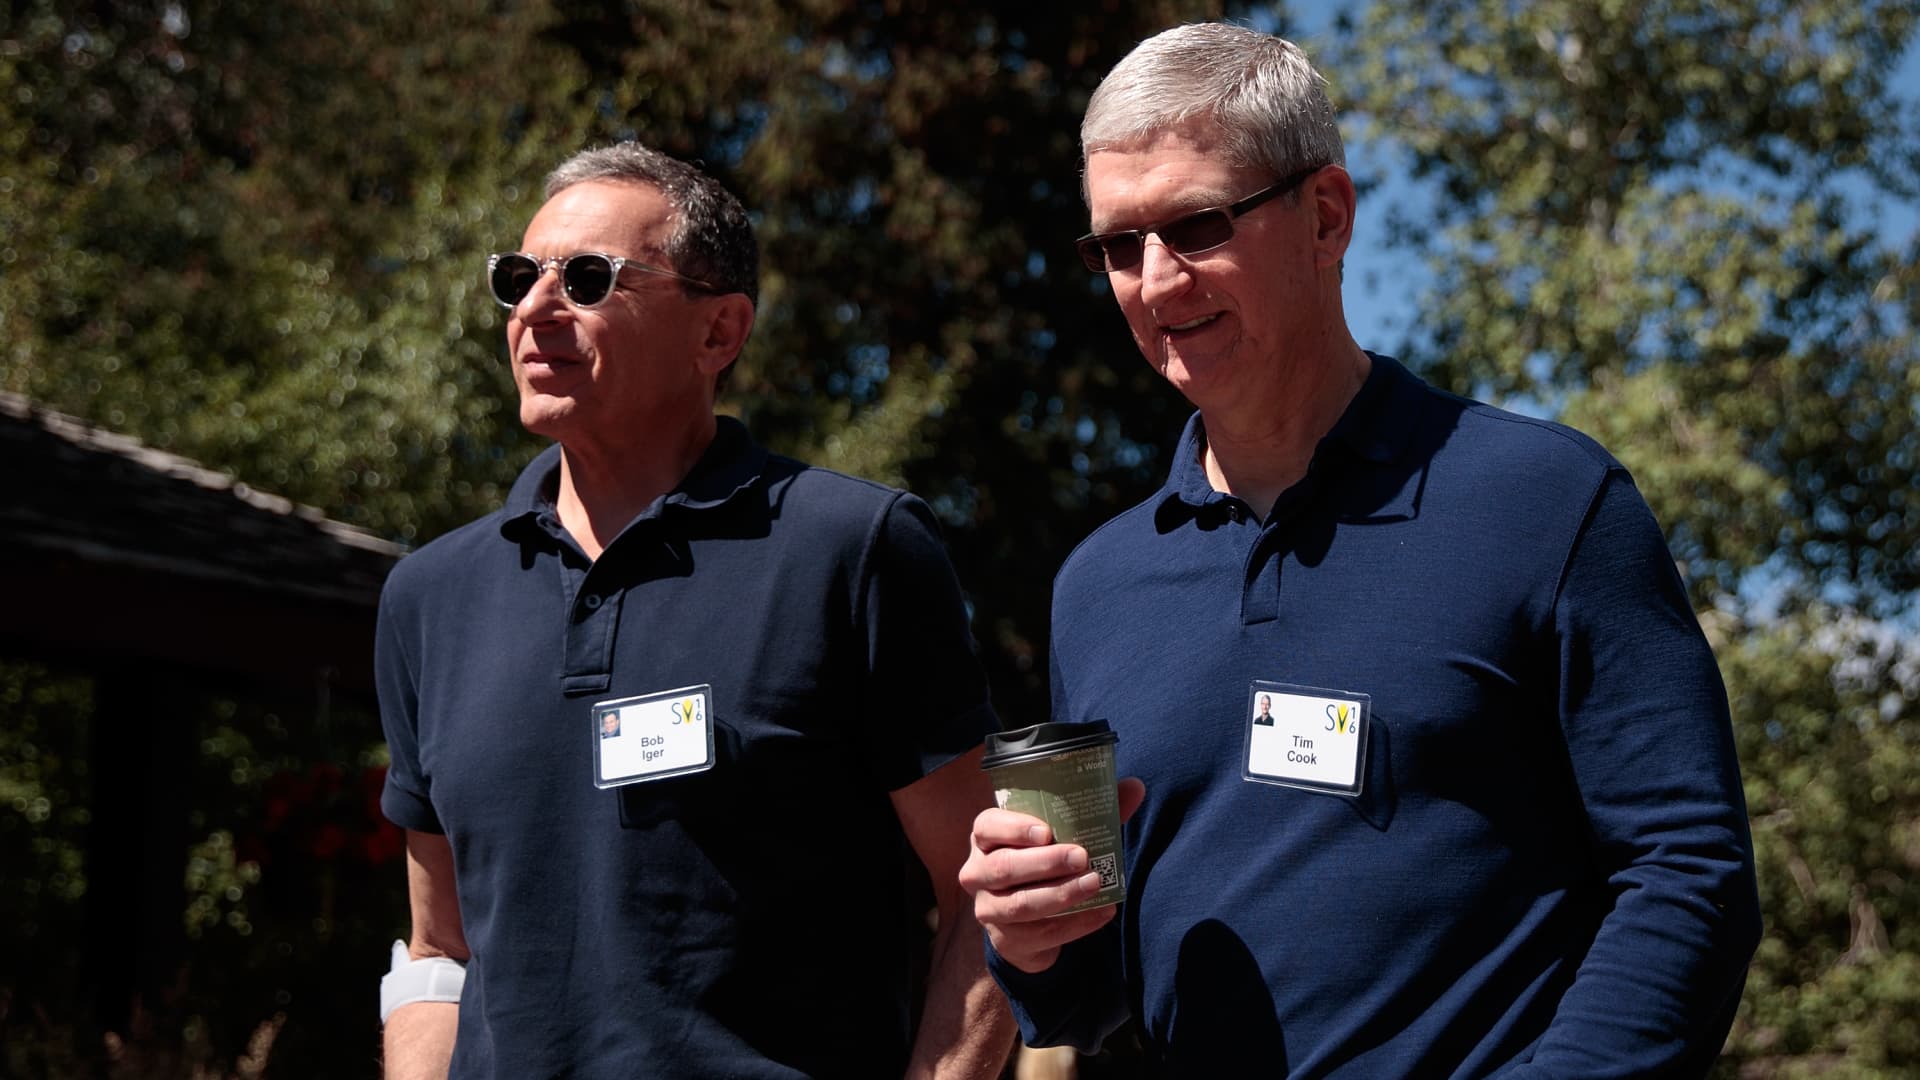 Apple buying Disney would be a storybook ending for Iger, but fairy tales aren't real